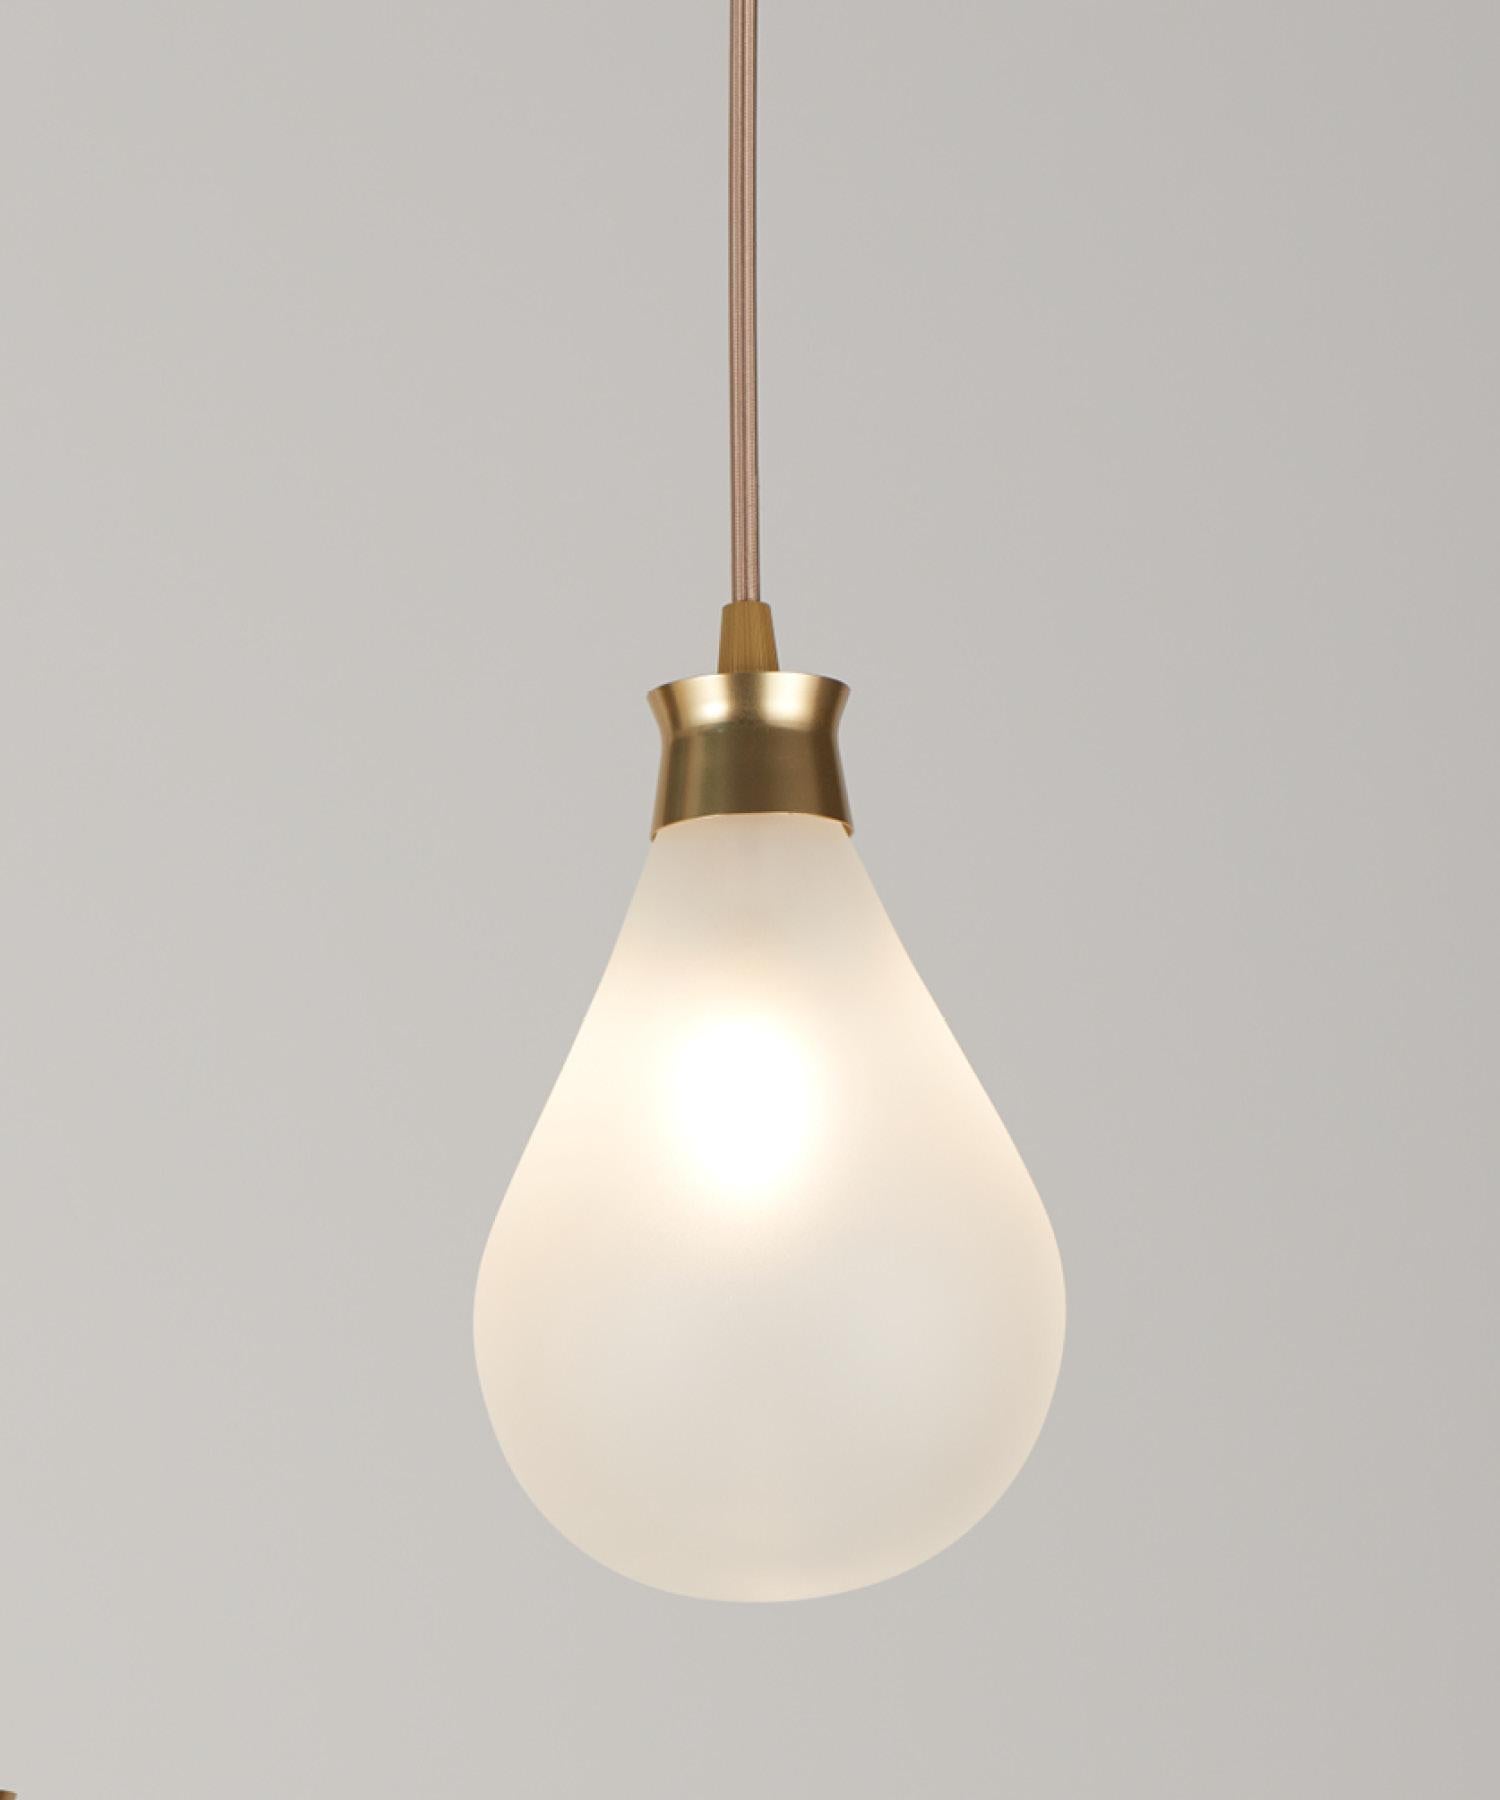 The Cintola Pendant works beautifully as a feature light for kitchens, bedrooms or living spaces. The hand-blown glass diffusers are available in a range of three colours to draw attention, whilst the anodised aluminium body keeps the overall